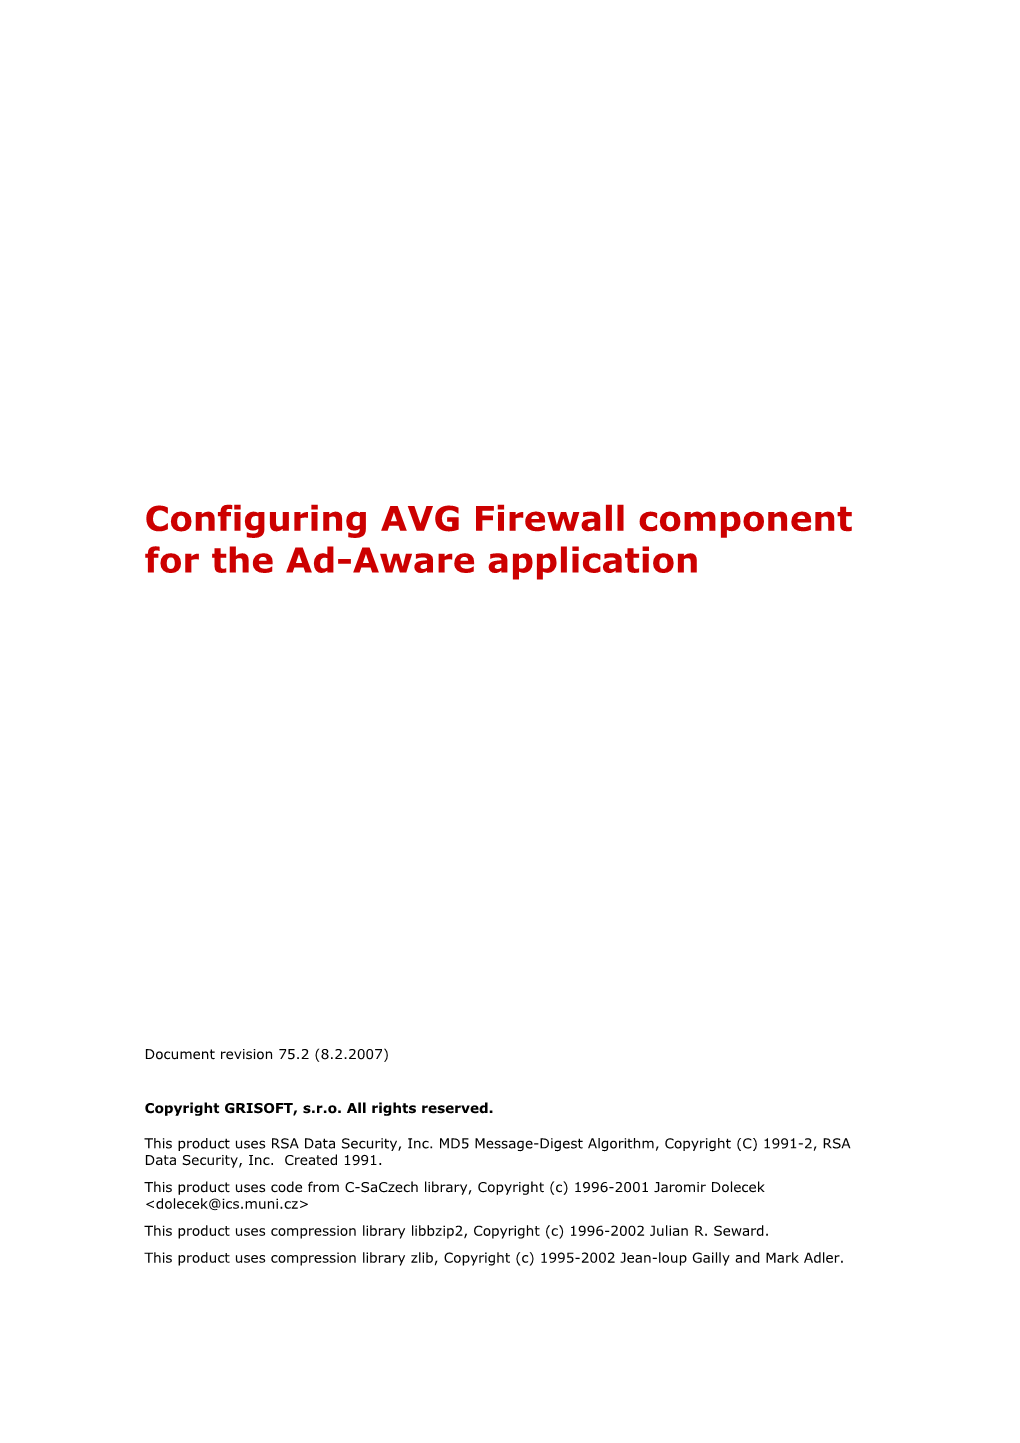 Configuring AVG Firewall Component for the Ad-Aware Application